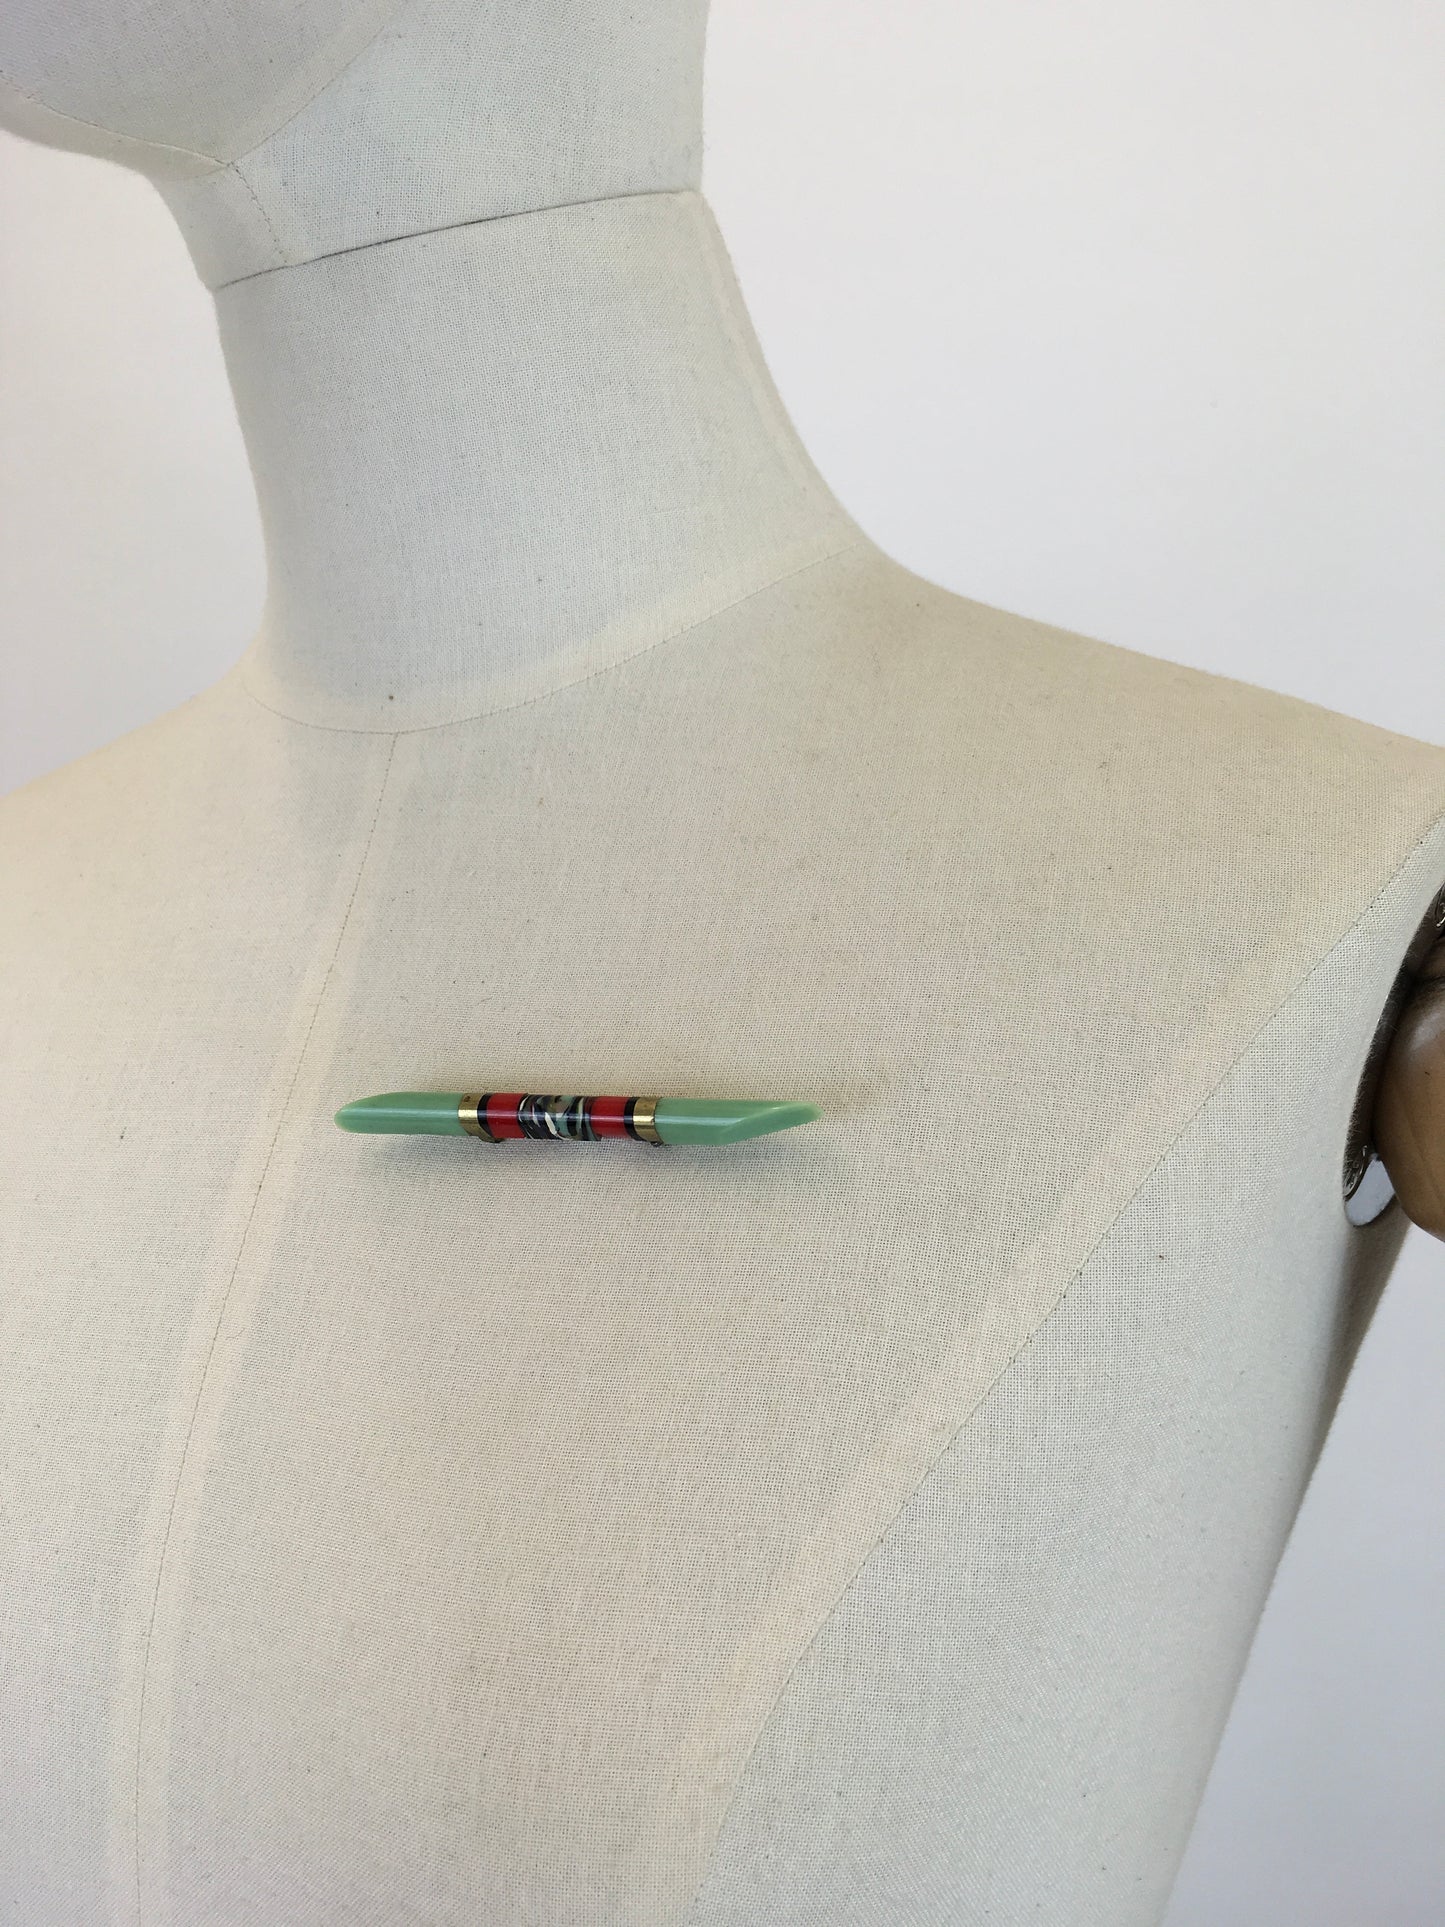 Original 1930's Stunning Bar Brooch - In Deco Green With Red & Marbled Inlay